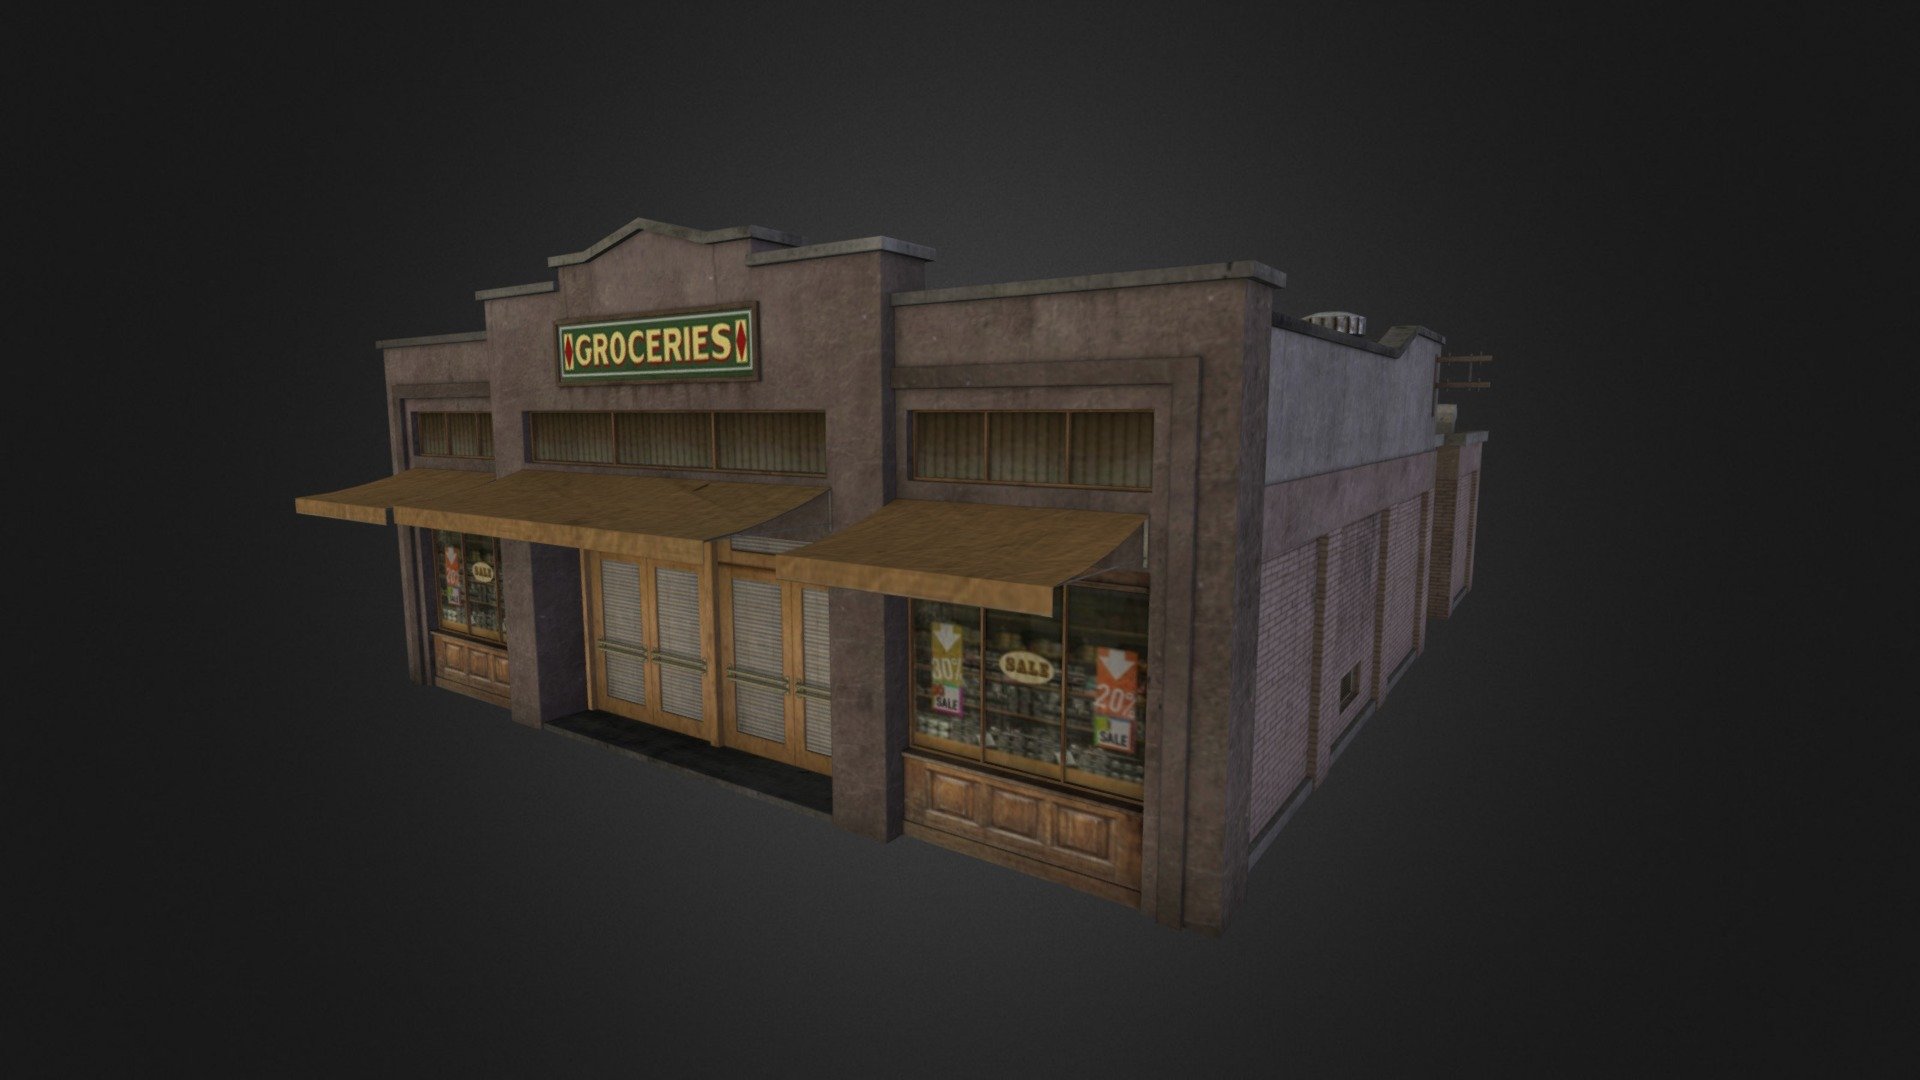 Made for Unity3d Asset Store as part of the Retro City Pack - Retro City Pack Building 09 - 3D model by noirfx 3d model